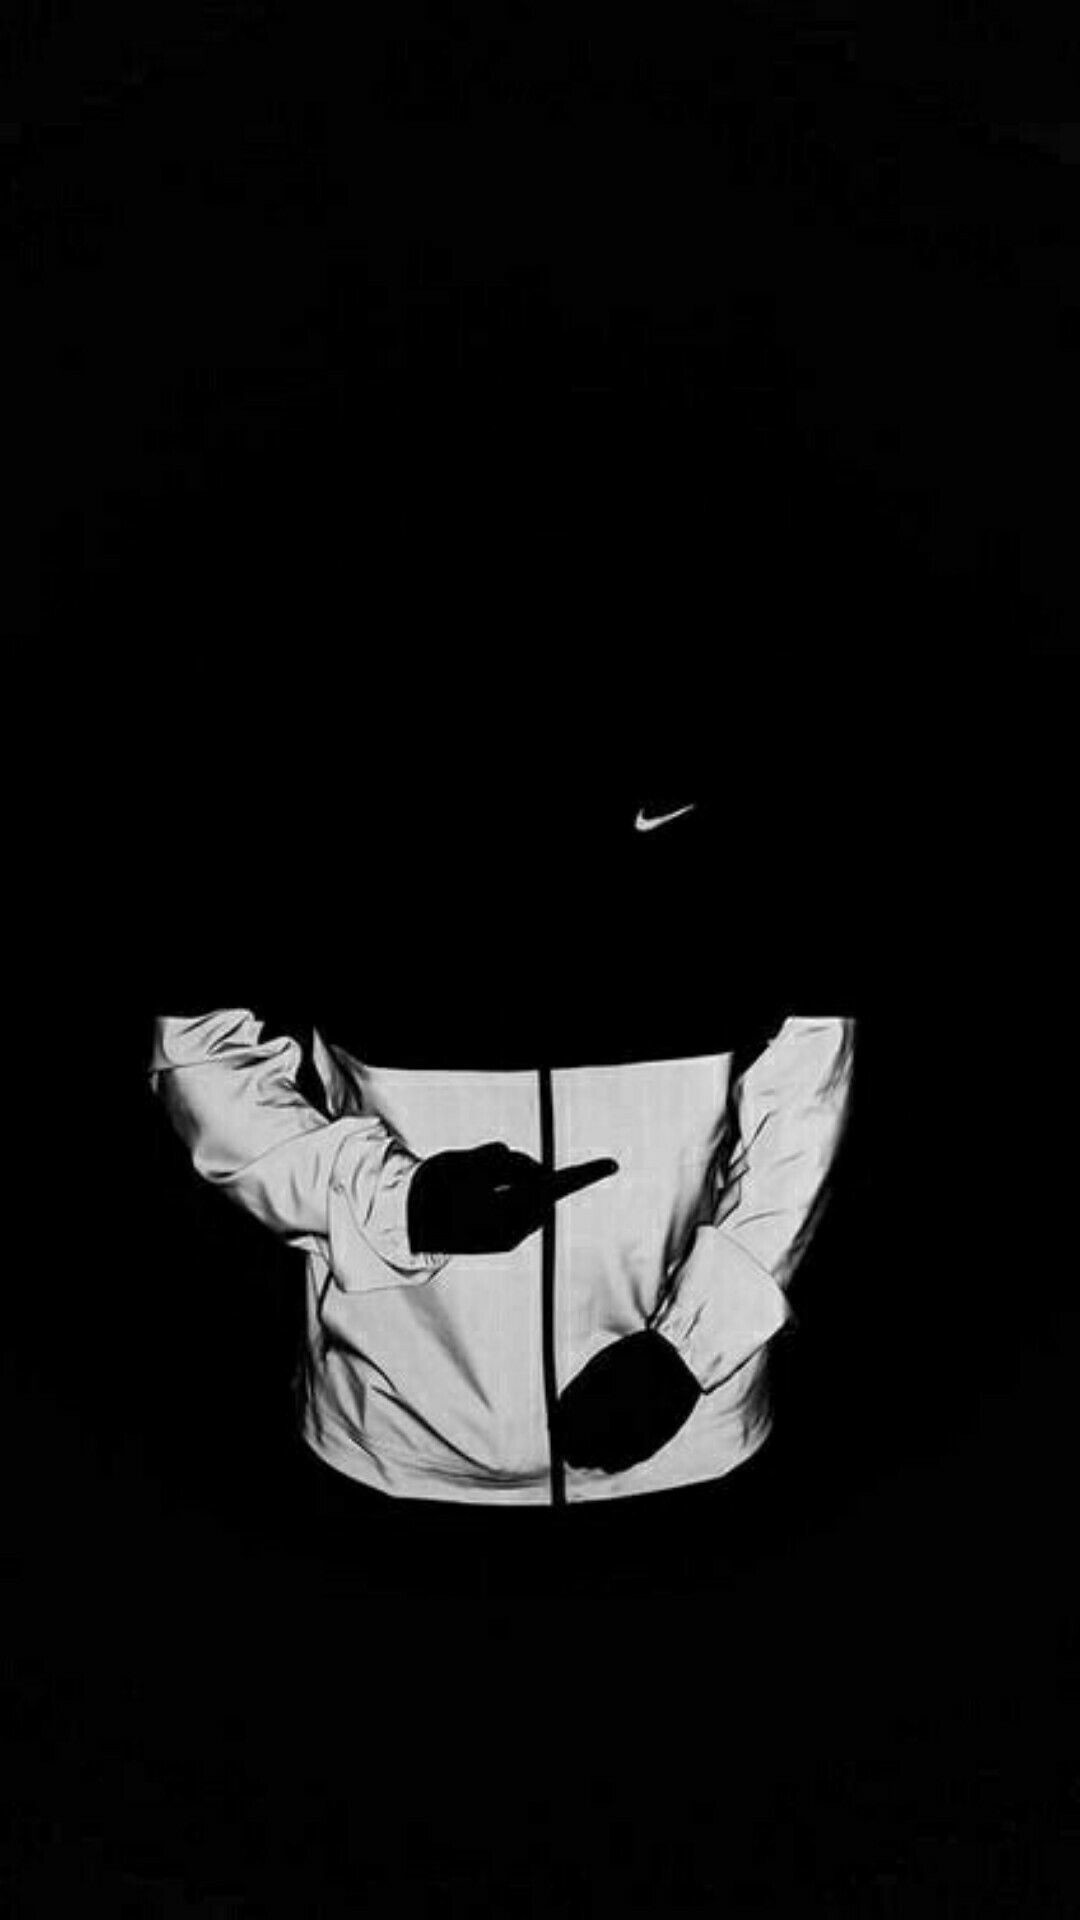 Free Download 78 Dope Nike Wallpapers On Wallpaperplay 1080x19 For Your Desktop Mobile Tablet Explore 50 Supreme Black Wallpaper Iphone Supreme Black Wallpaper Iphone Supreme Iphone Wallpapers Supreme Iphone Wallpaper